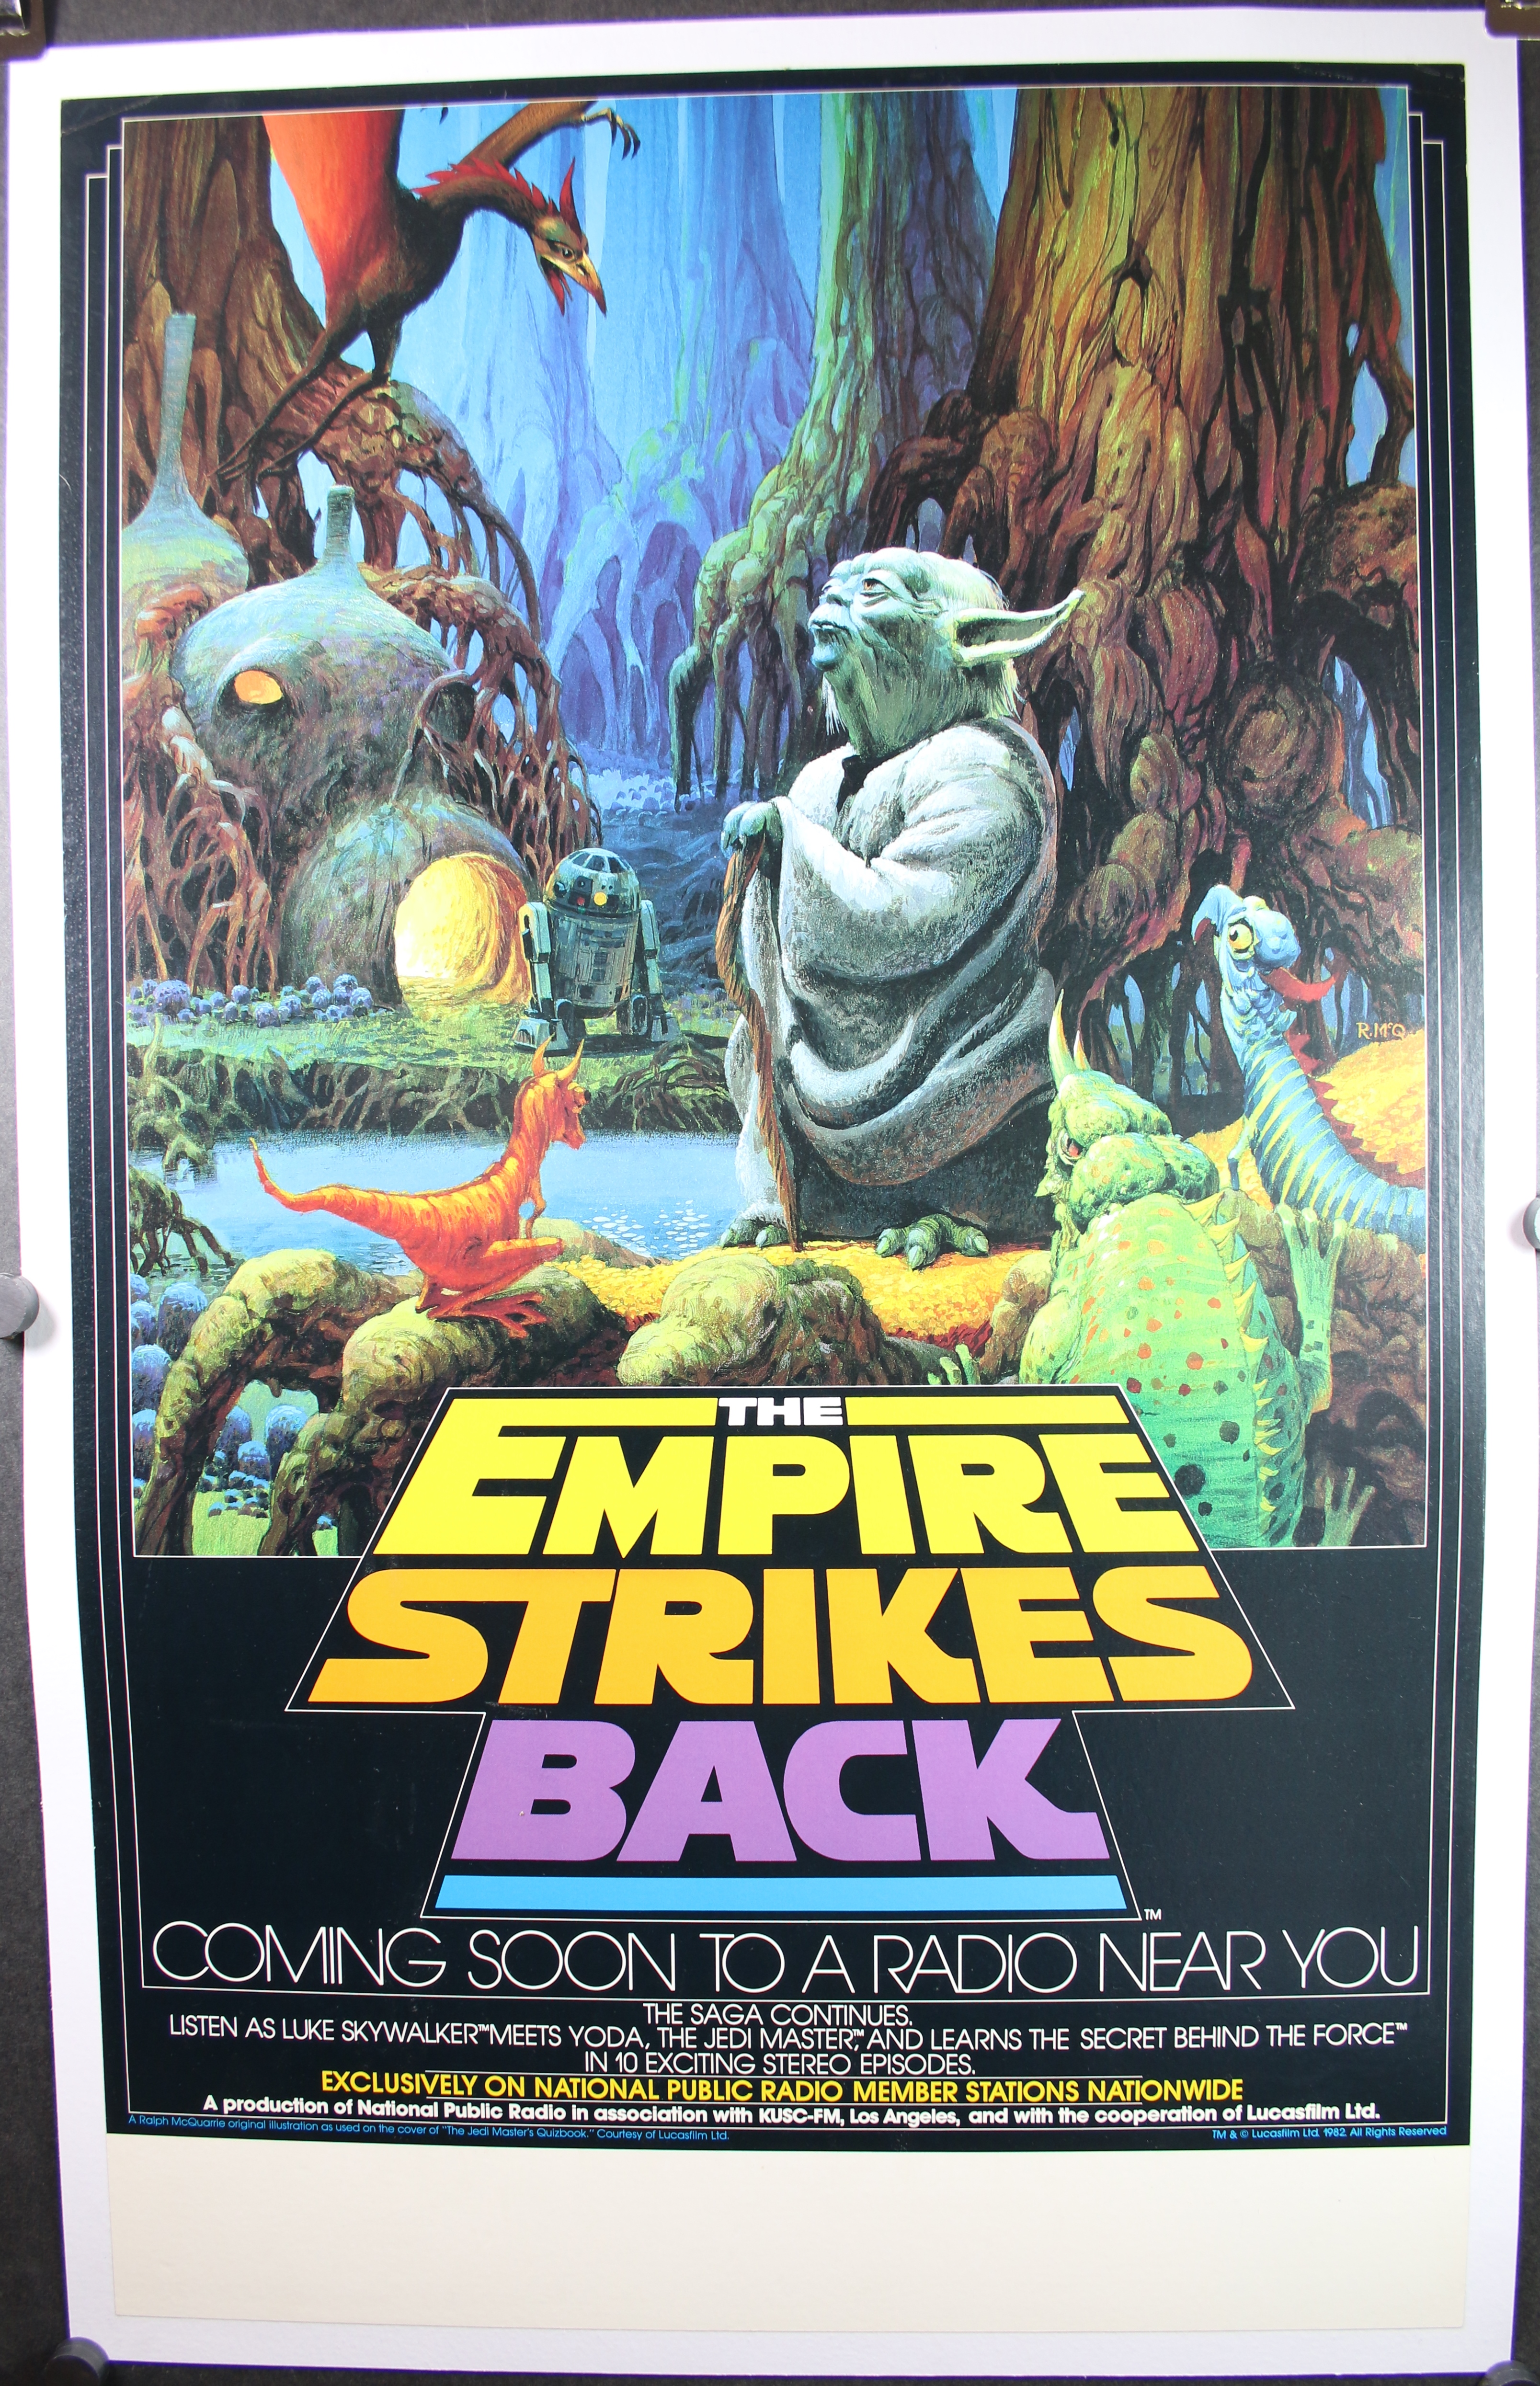 The Empire Strikes Back Coming Soon to a Radio Near You Poster